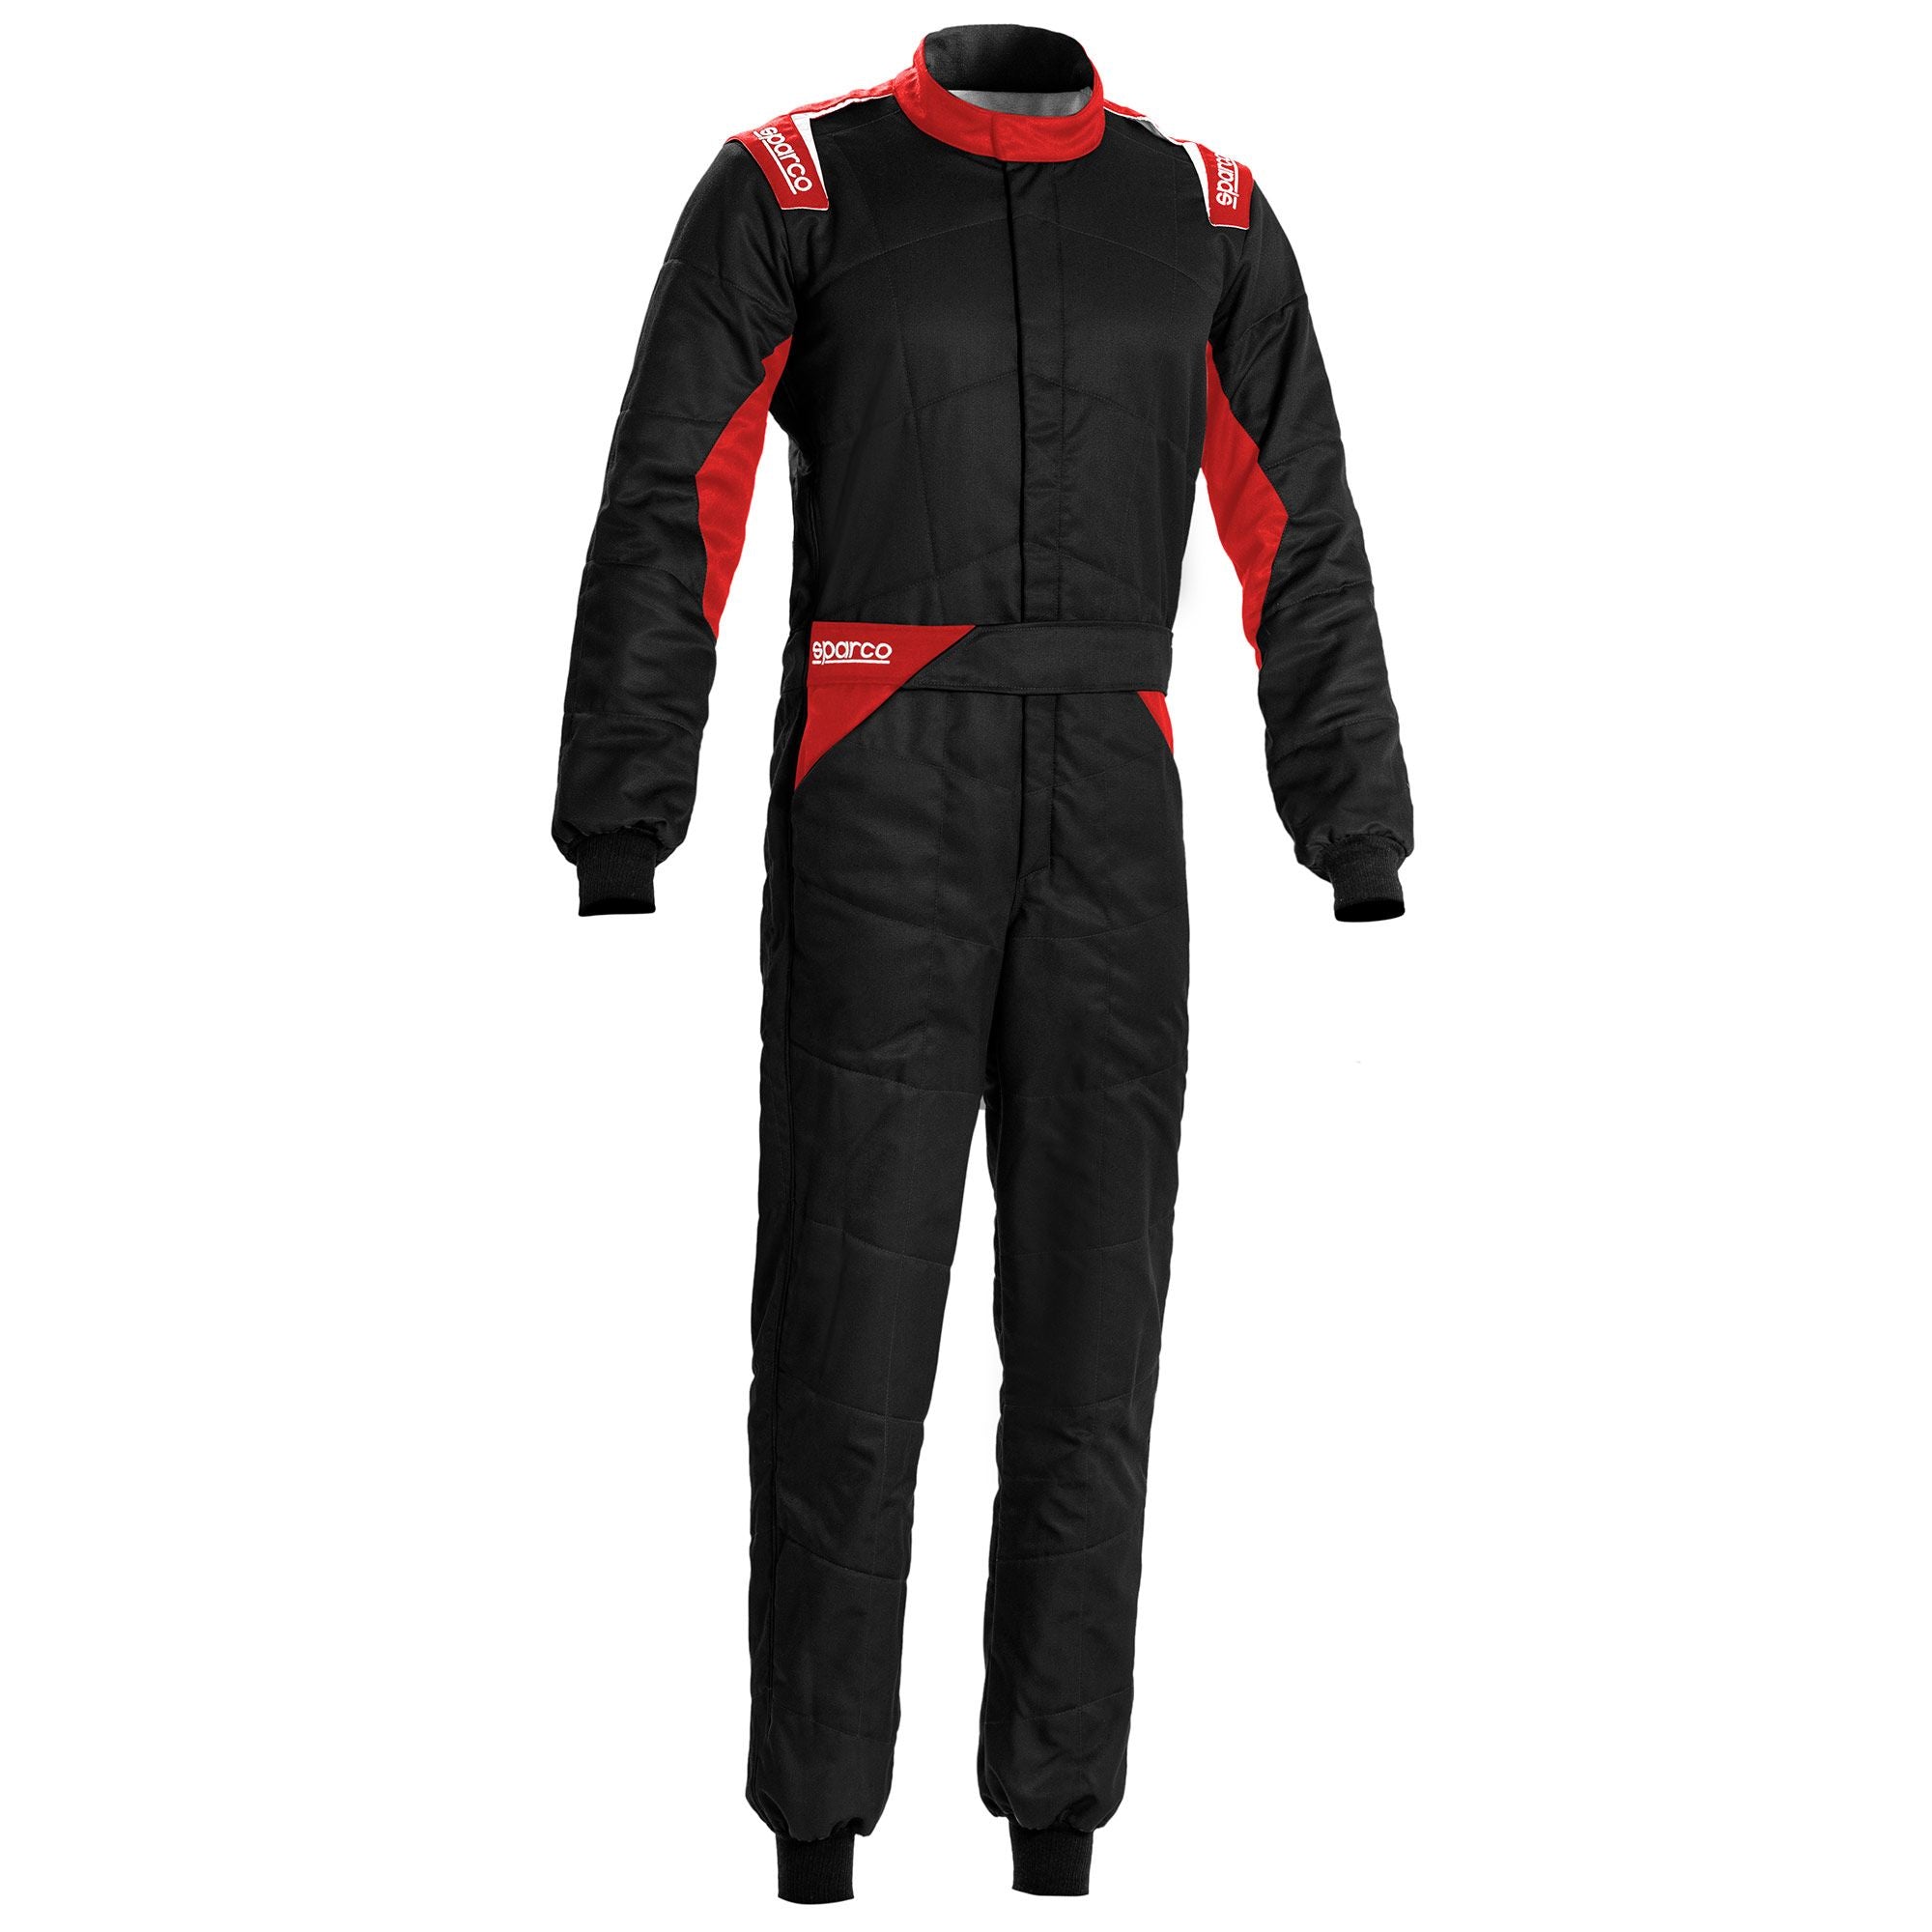 SPARCO 00109352NRRS SPRINT 2022 Racing suit, FIA 8856-2018, black/red, size 52 Photo-0 